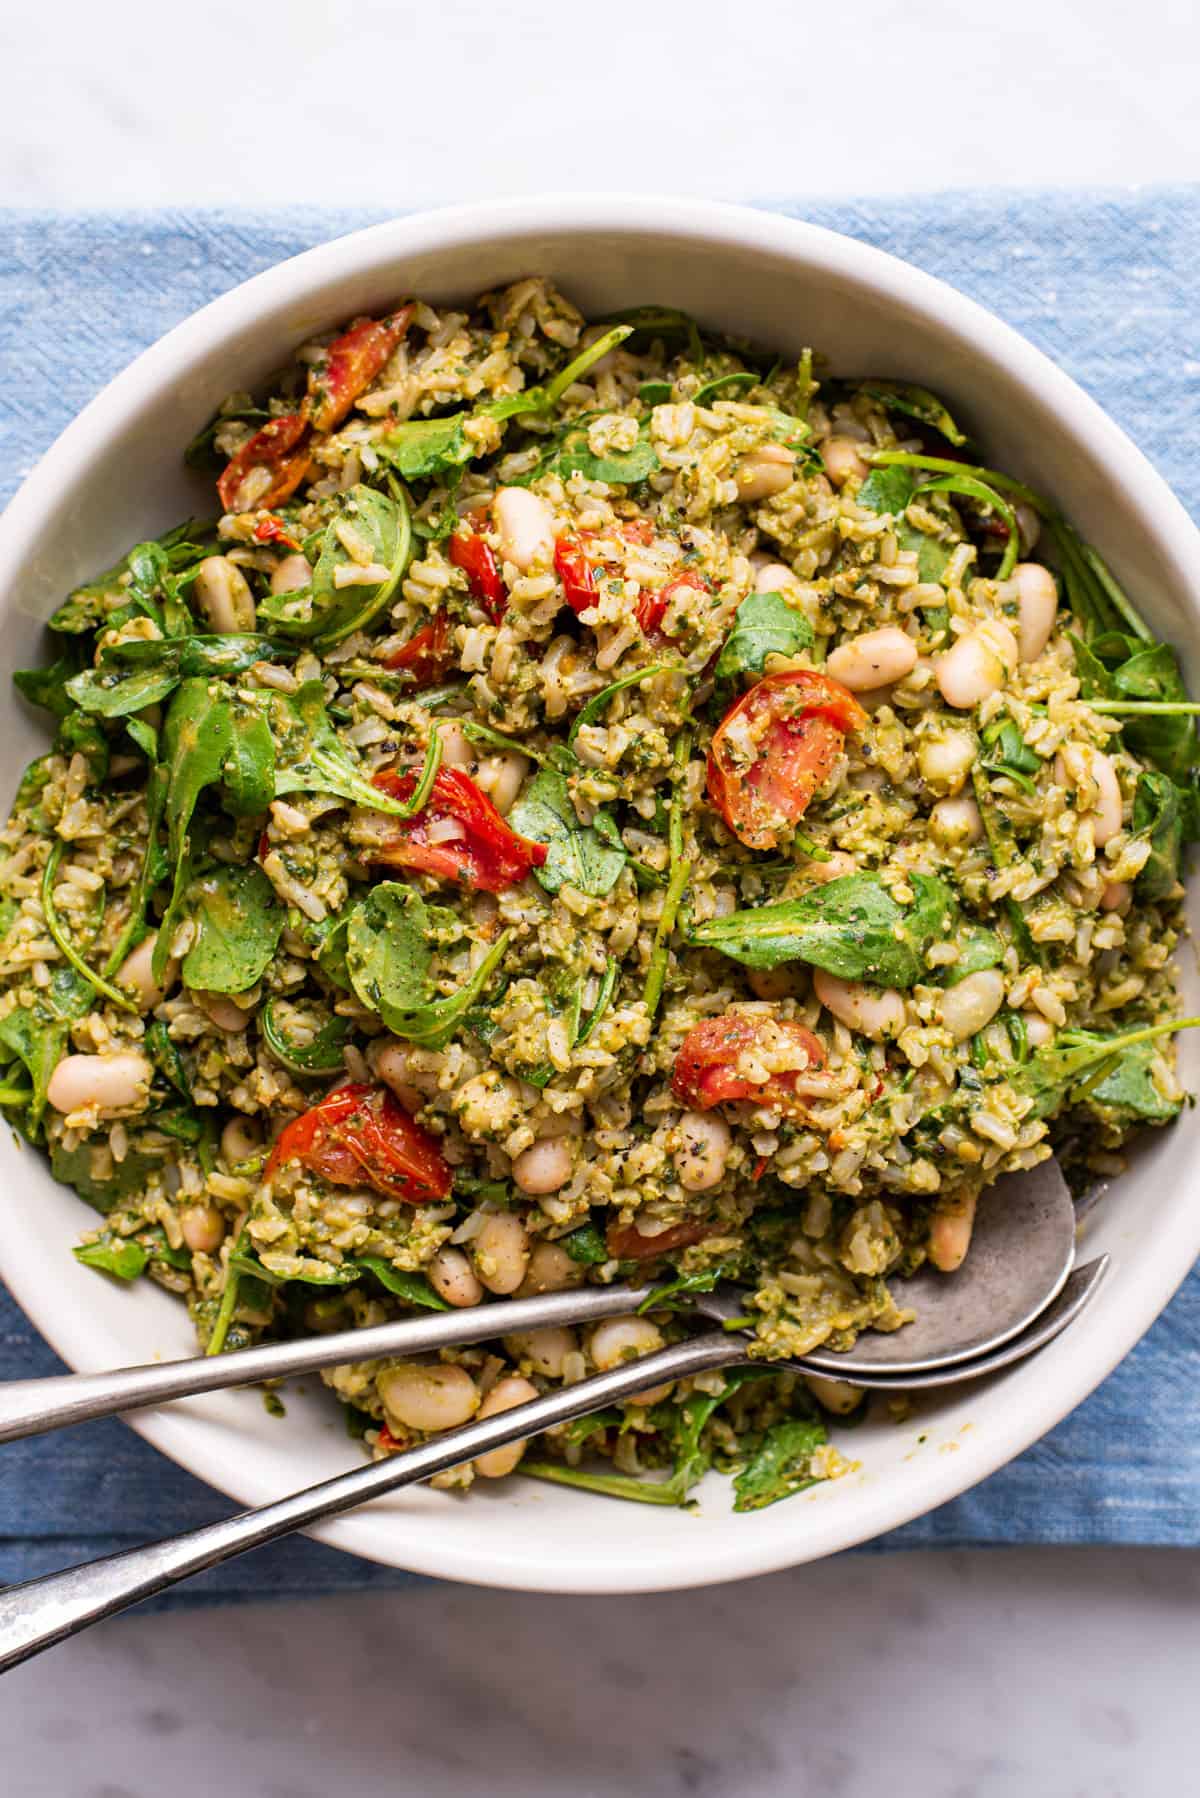 Summer rice salad with pesto and tomatoes in a beige bowl on a blue napkin.